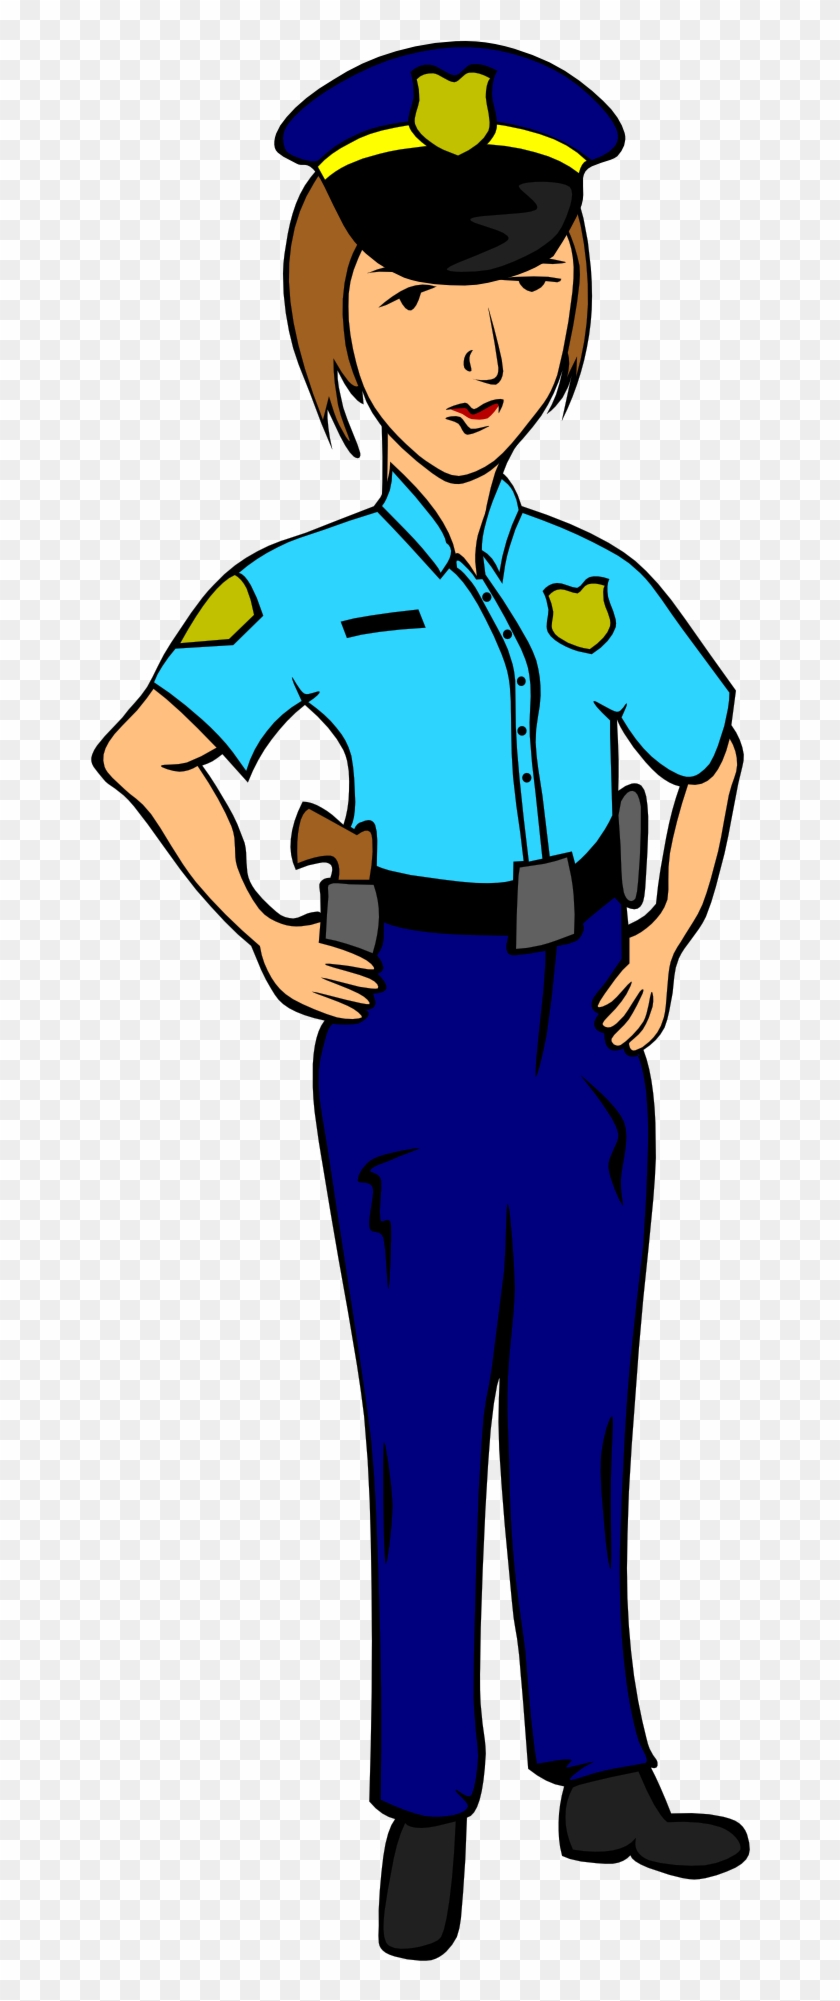 Police Officer Uniform Woman Drawing Free Image - Police Officer Clipart #706454